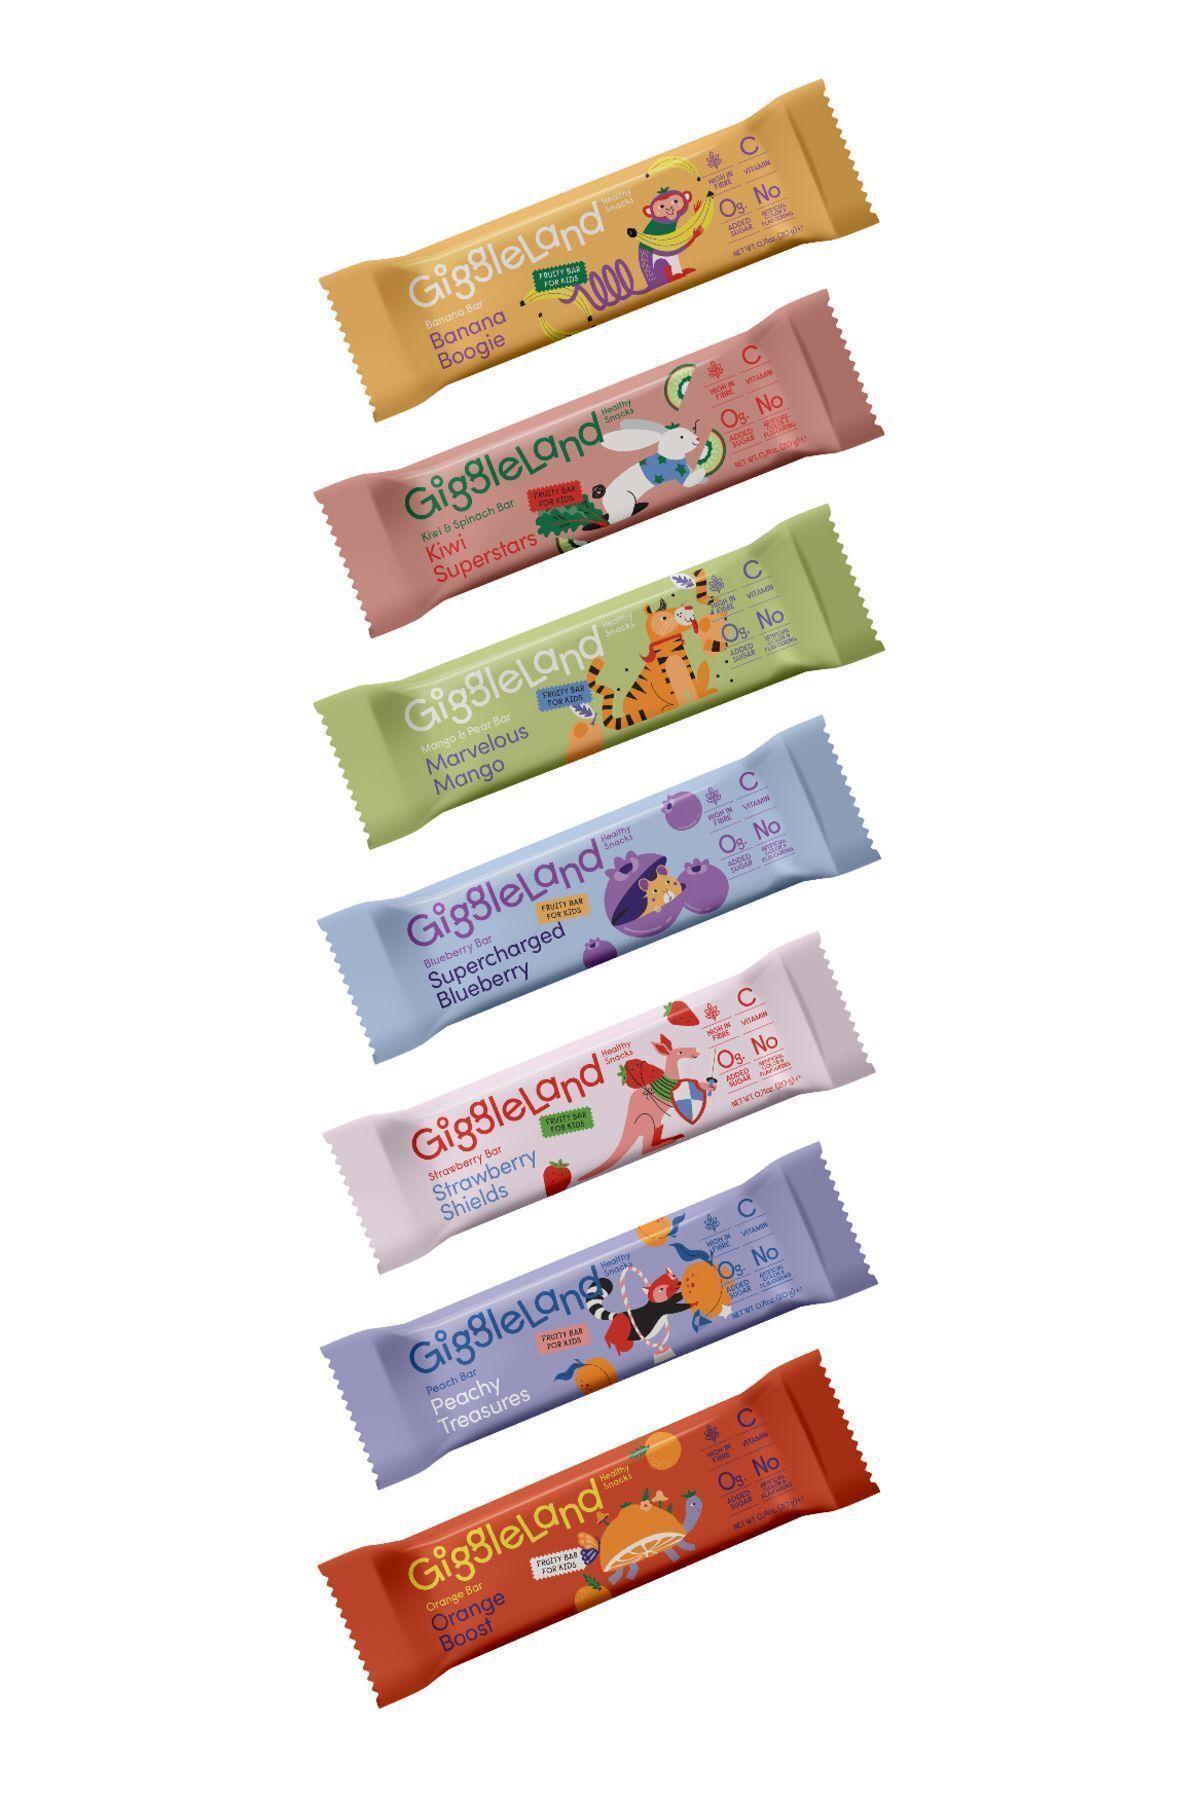 Fruit Bar - Introduction Package 7 x 20 g. - Assorted Fruit Bars for a Fresh Snack Experience